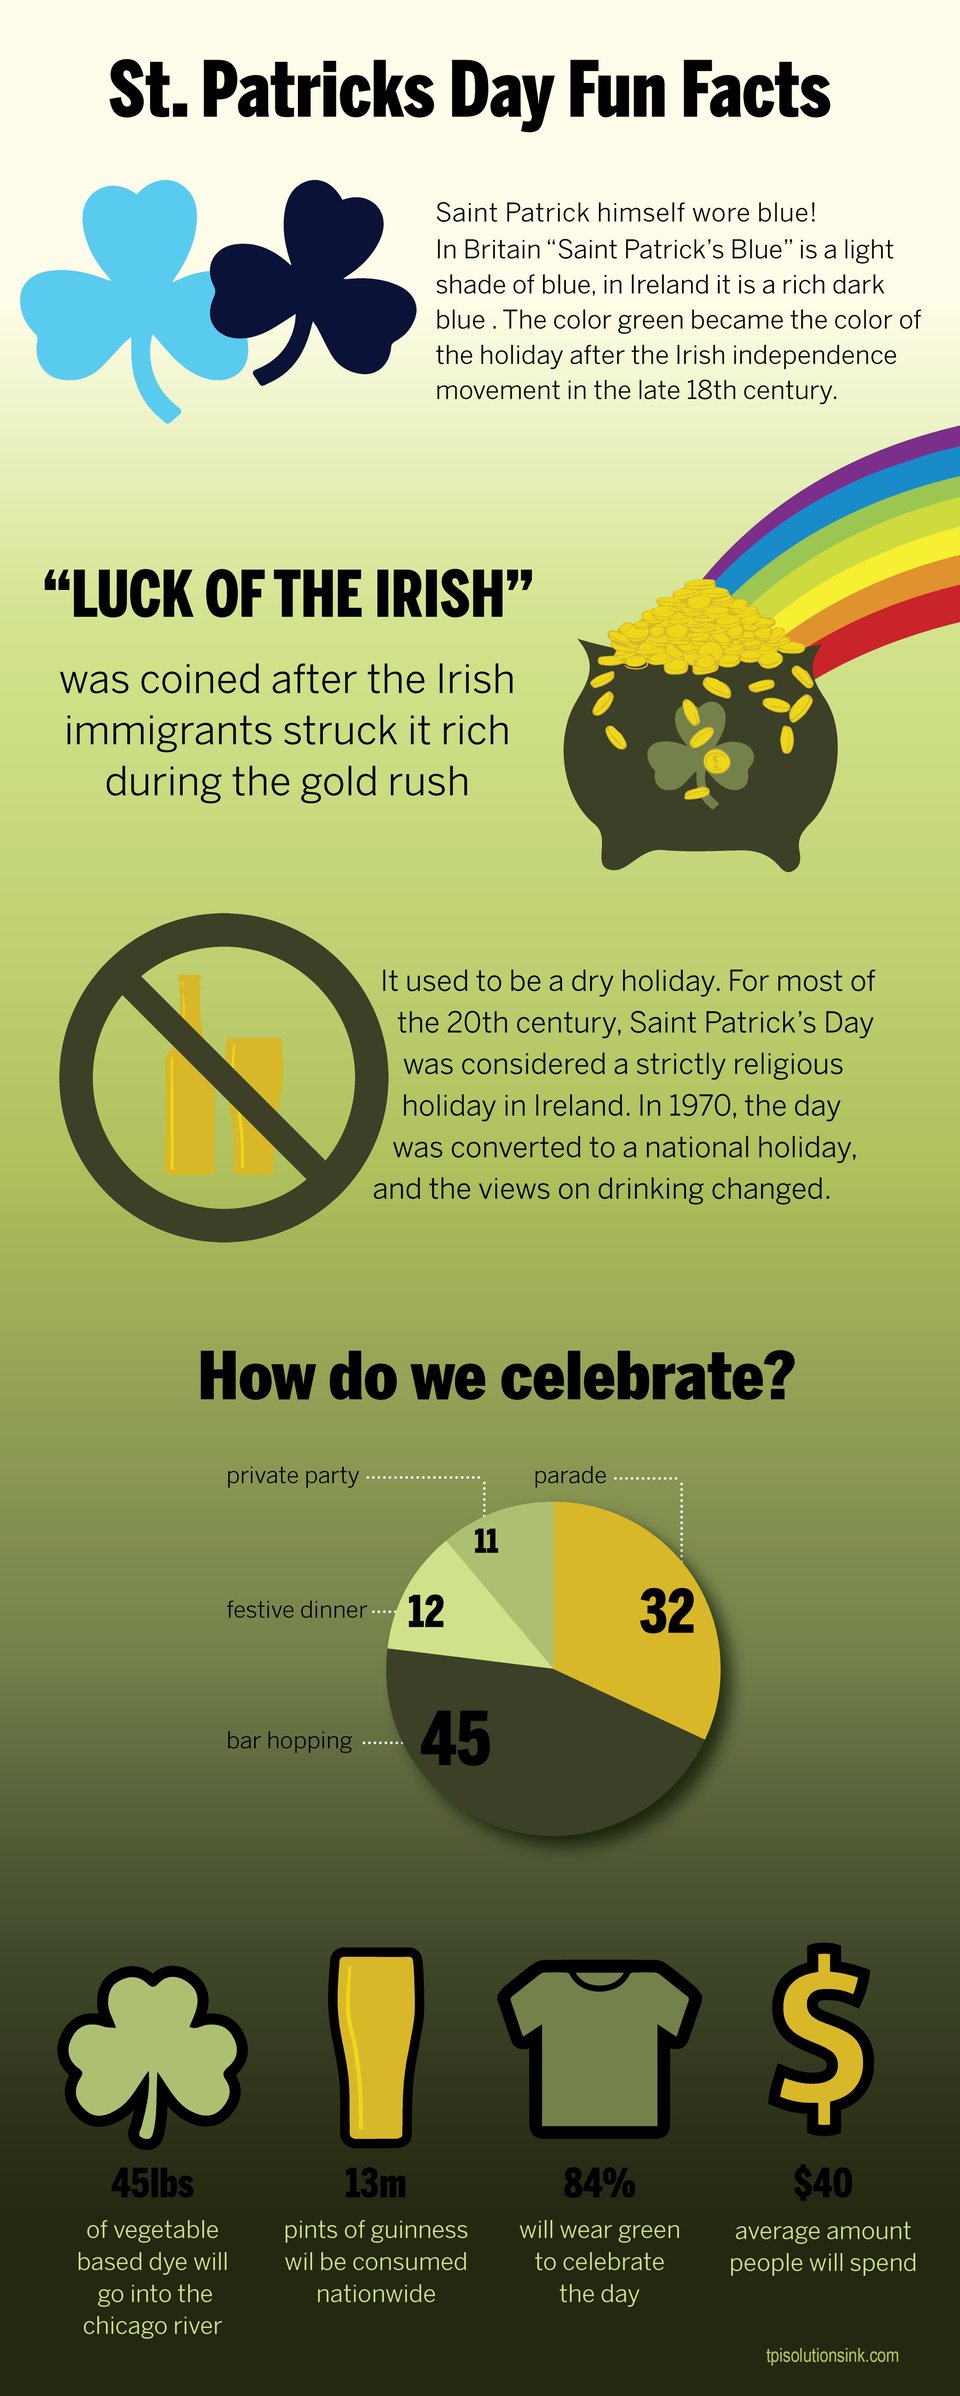 Fun Facts Of St Patrick's Day